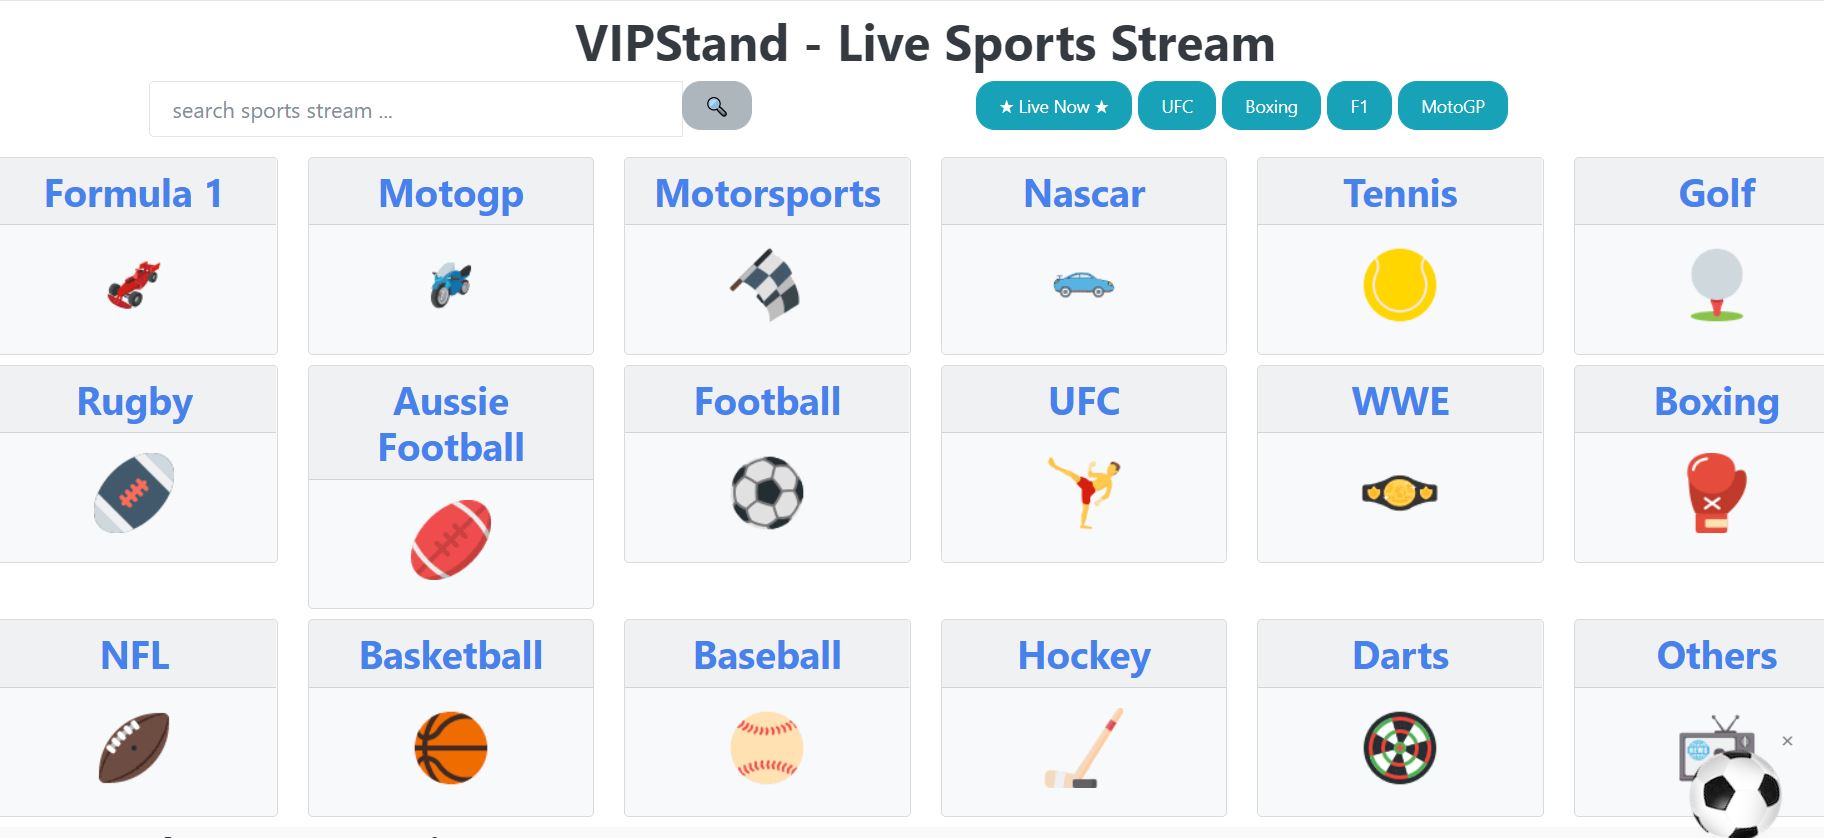 VIPStand - A Sports Search Engine That Allows You To Find And Watch Sports Events Around The Globe